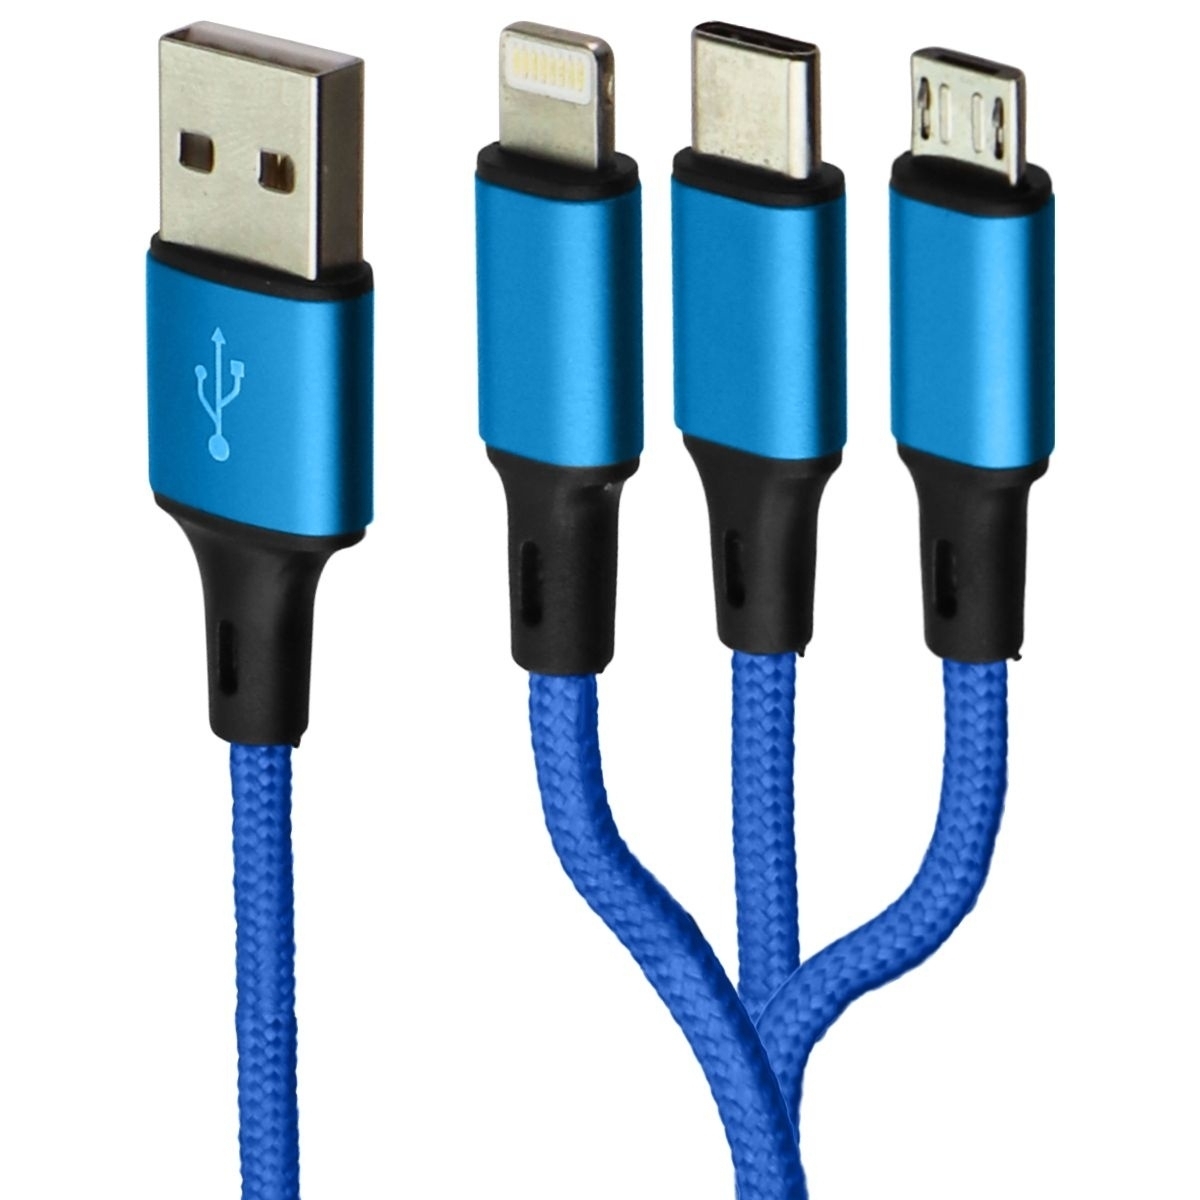 Zoda 3-in-1 USB-C/Lightning 8-Pin/Micro USB Braided Cable (4FT) - Blue/Teal